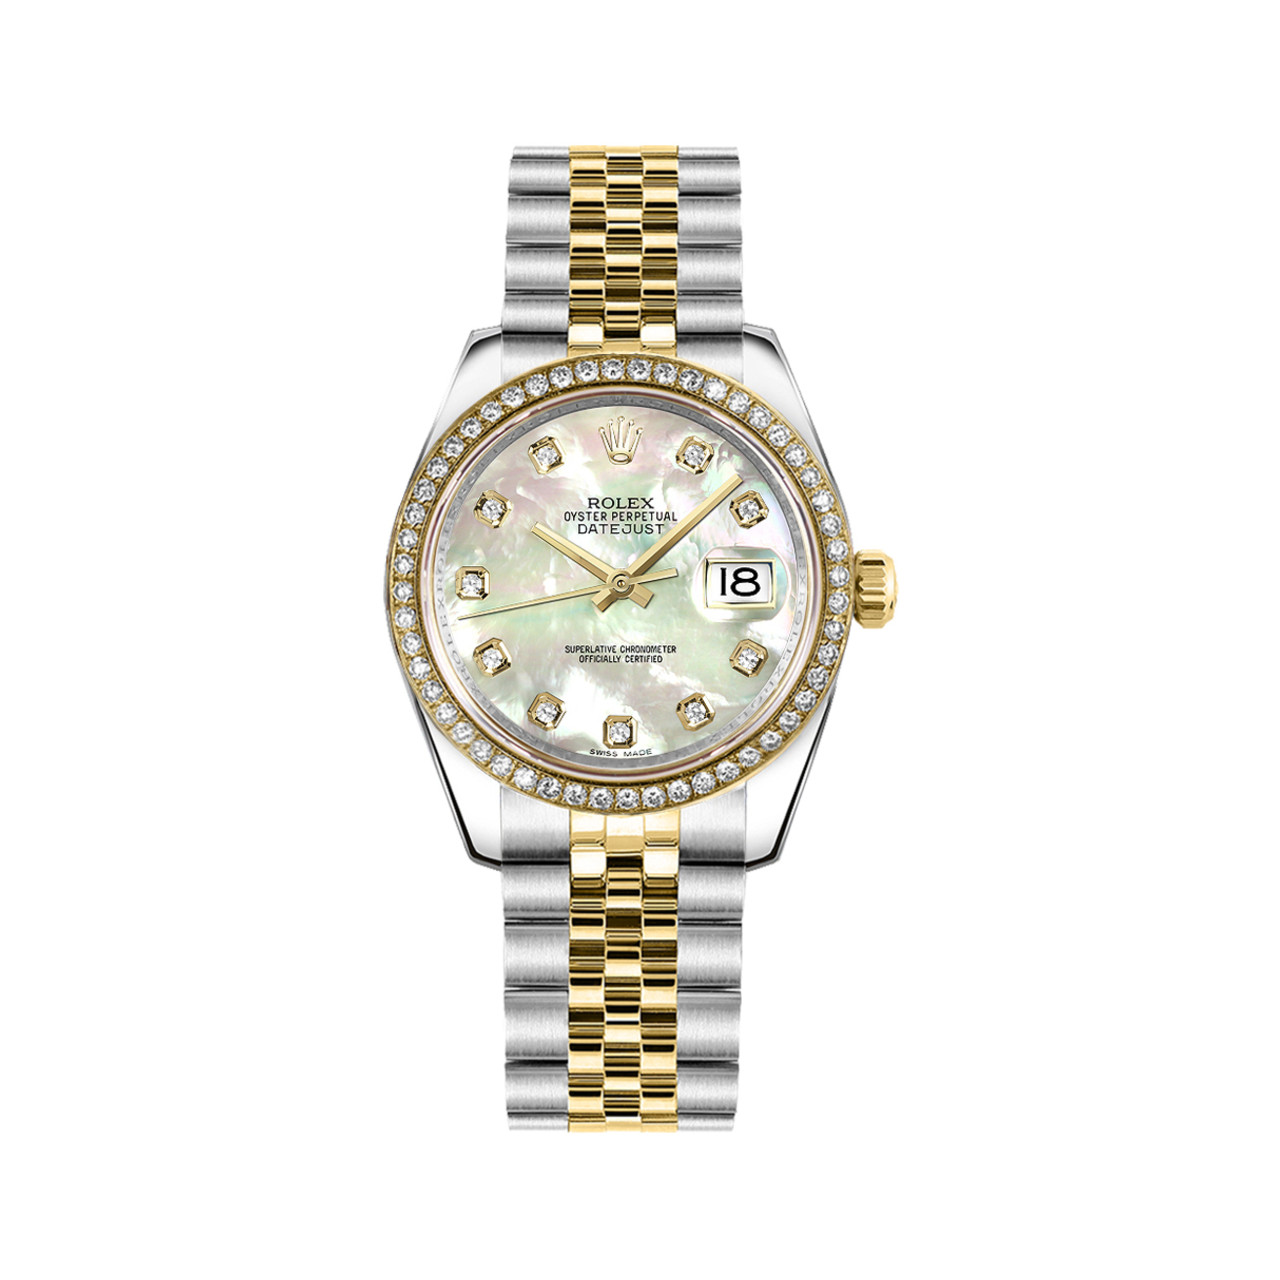 Rolex Lady-Datejust 178383 Stainless Steel & Yellow Gold Watch (Mother Rolex Lady Datejust Stainless Steel Price